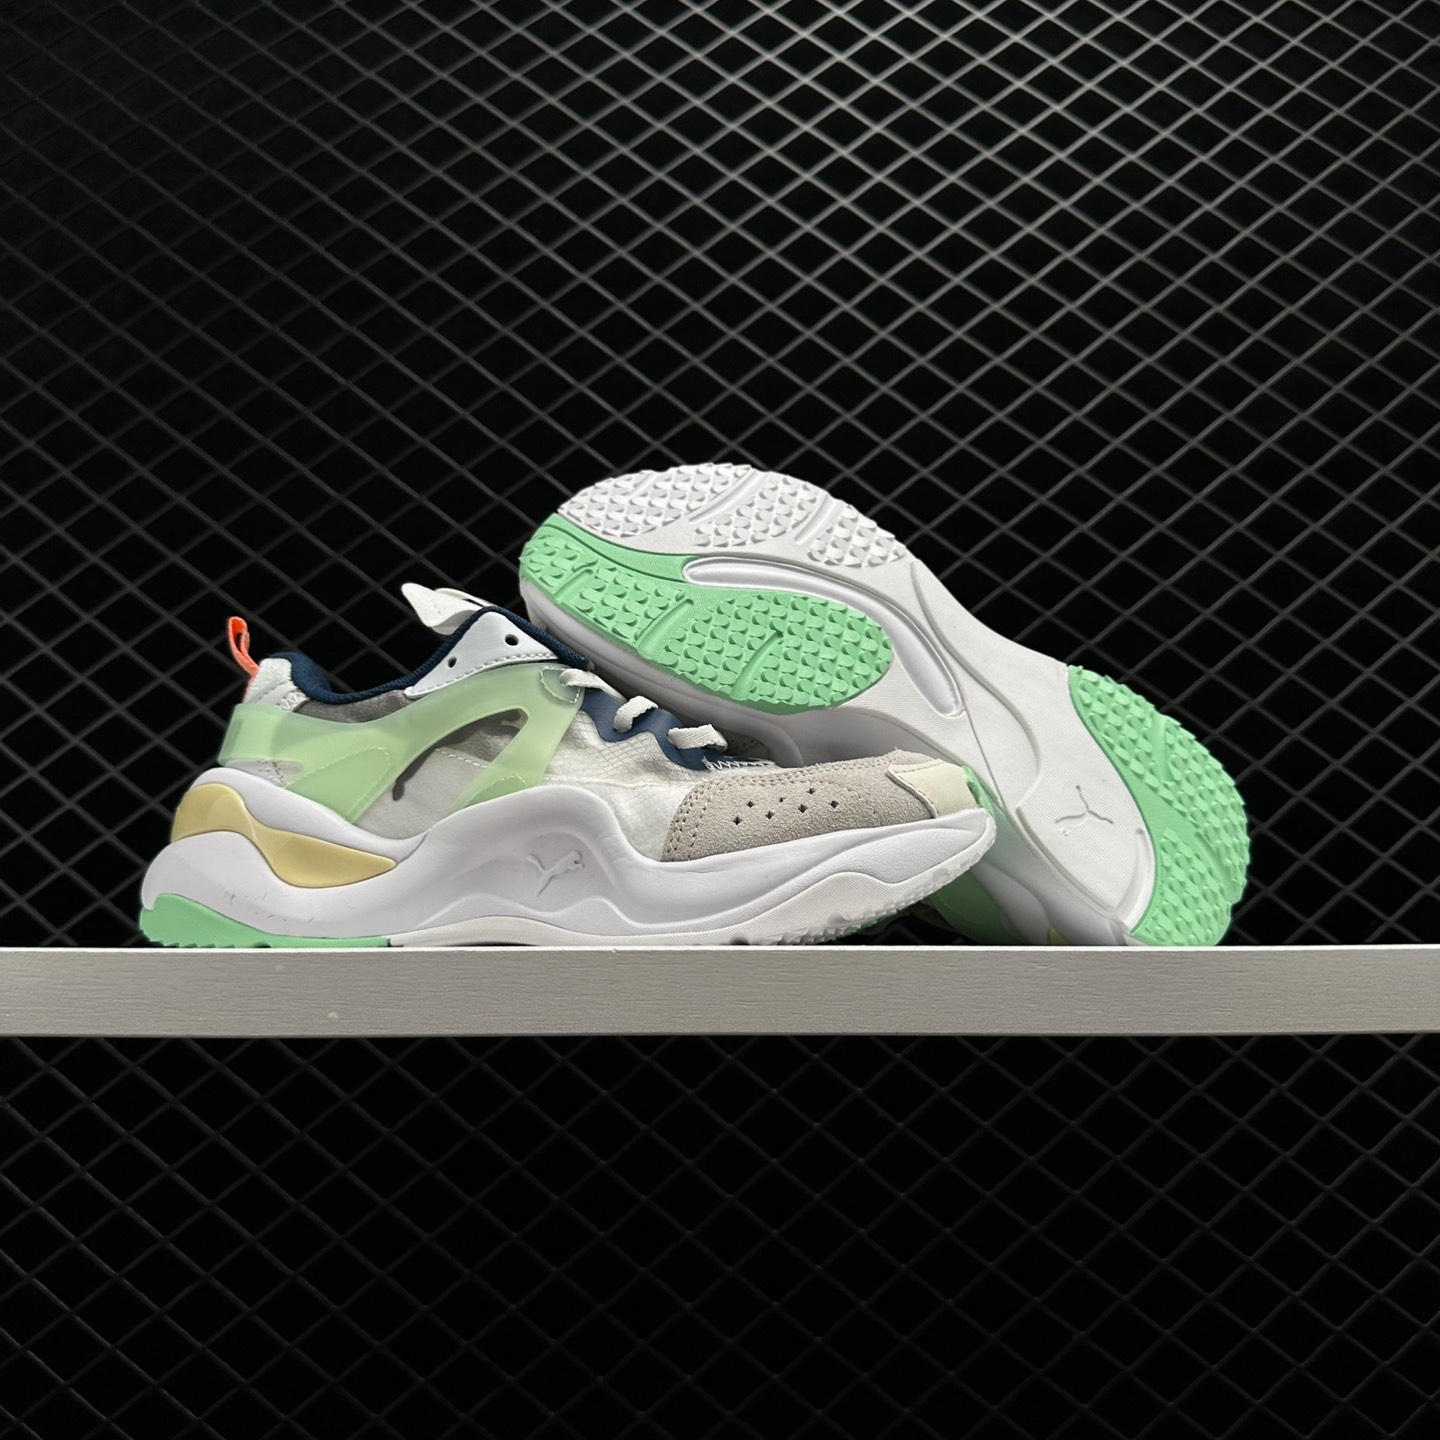 Puma Rise 'Mist Green' 371777-01 - Stylish and Comfortable Sneakers